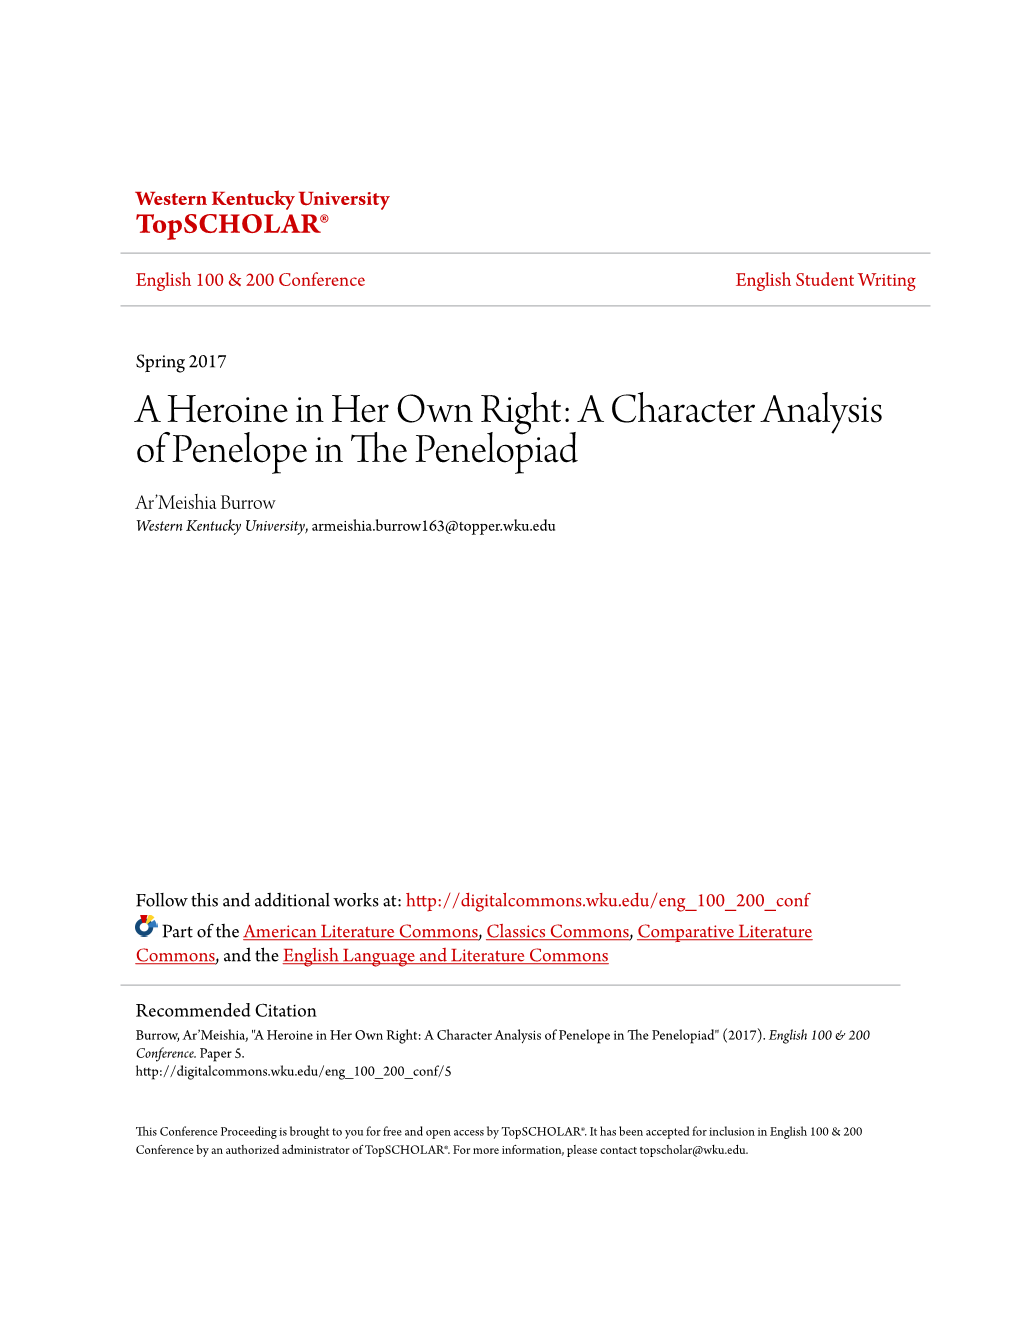 A Character Analysis of Penelope in the Penelopiad